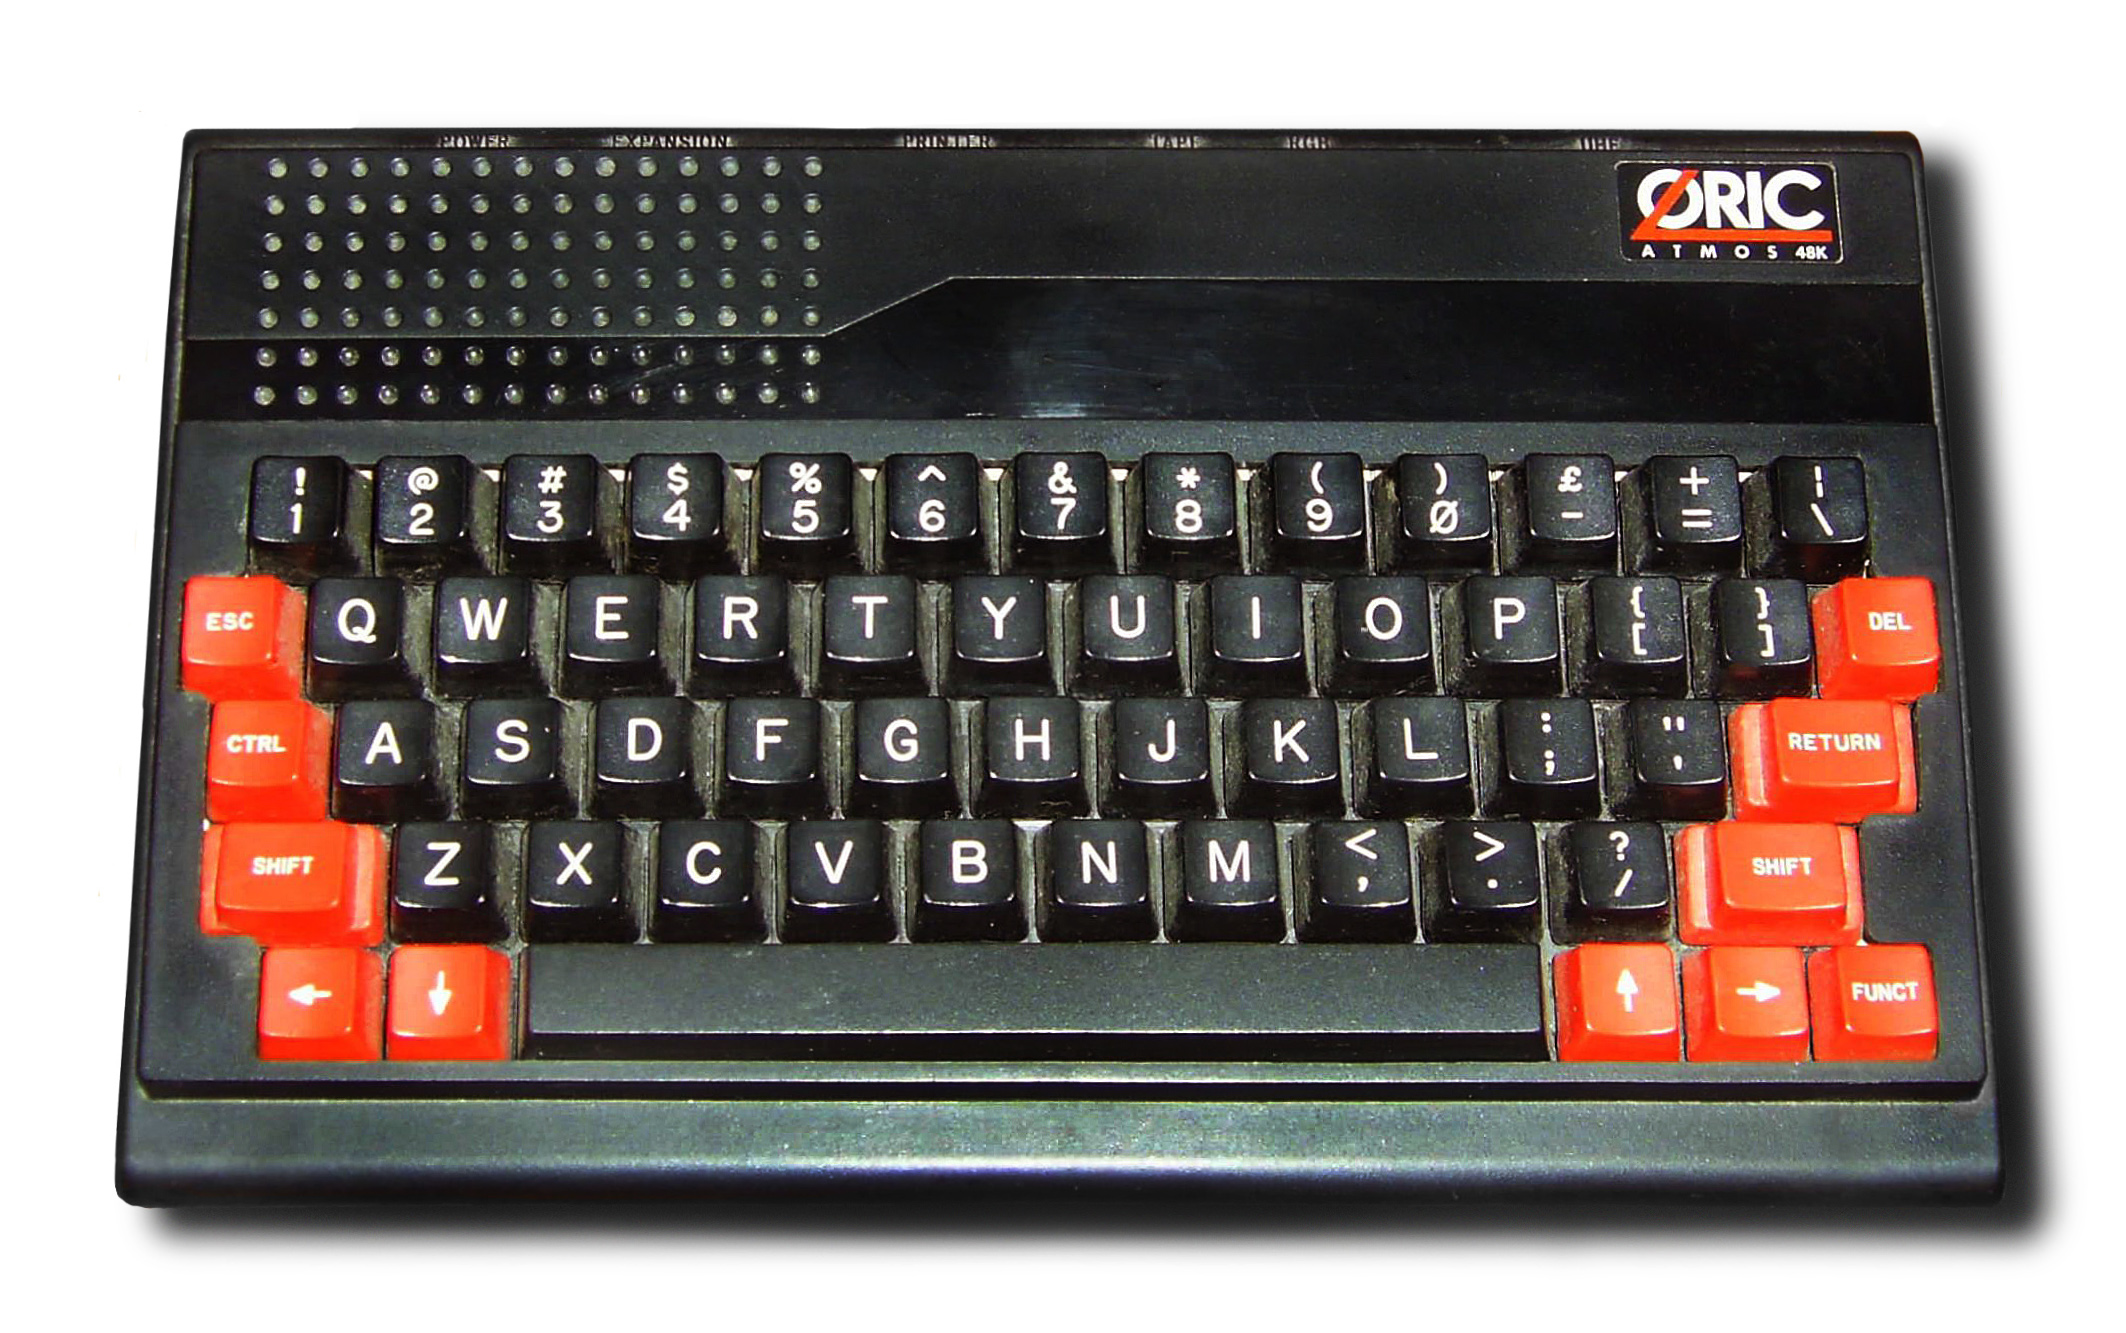 Before he could afford the Atari ST, Zaé fiddled with the Oric Atmos.